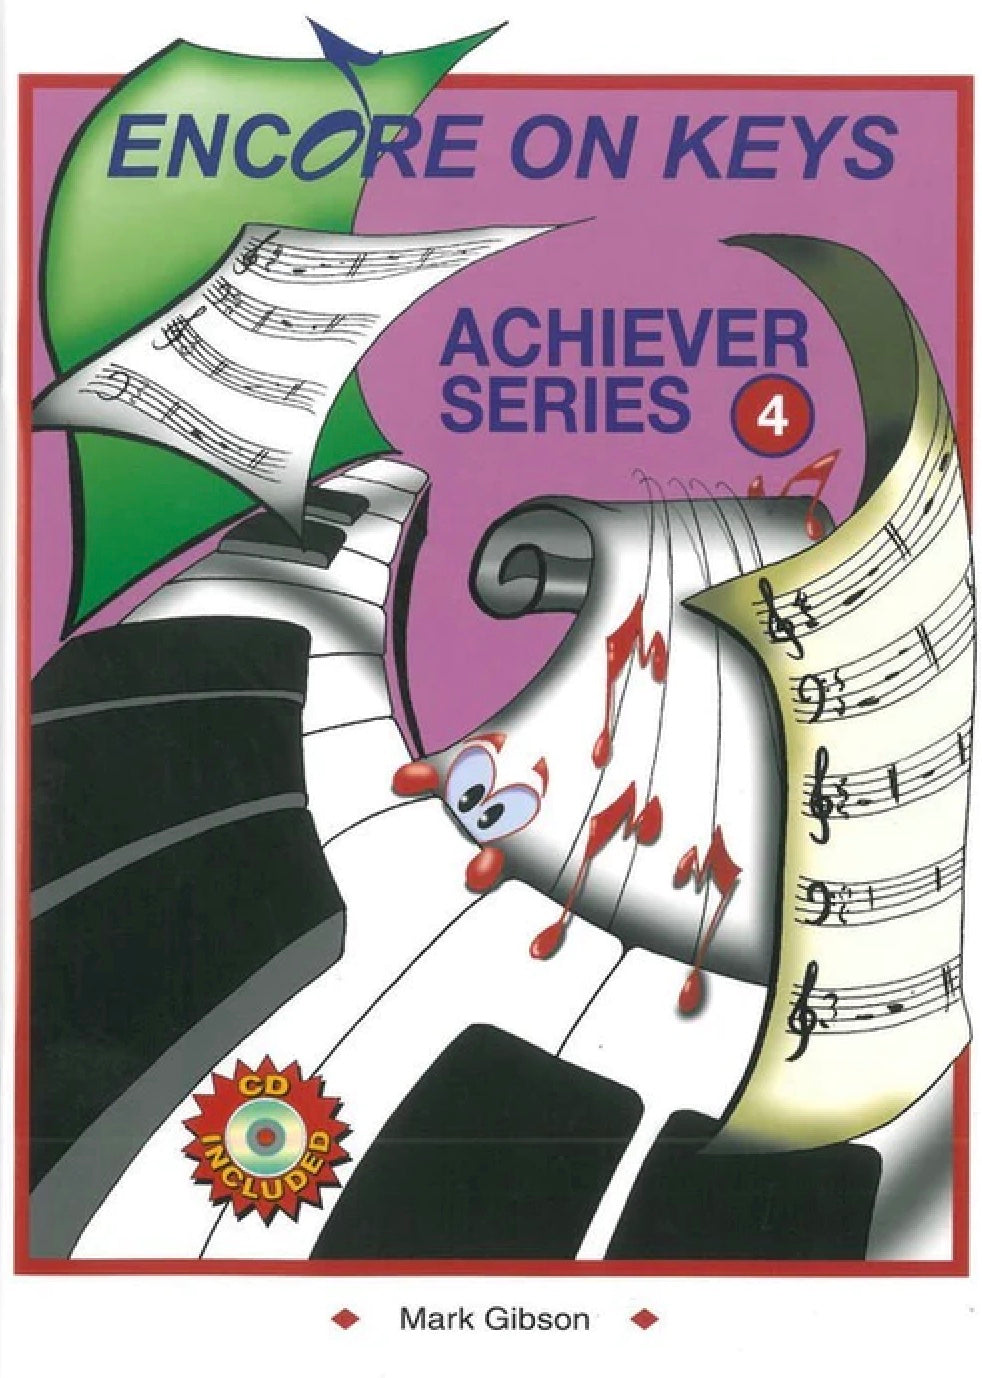 Encore On Keys Achiever Series 4 - Piano/CD by Gibson/Robinson Accent Publishing ASCK004